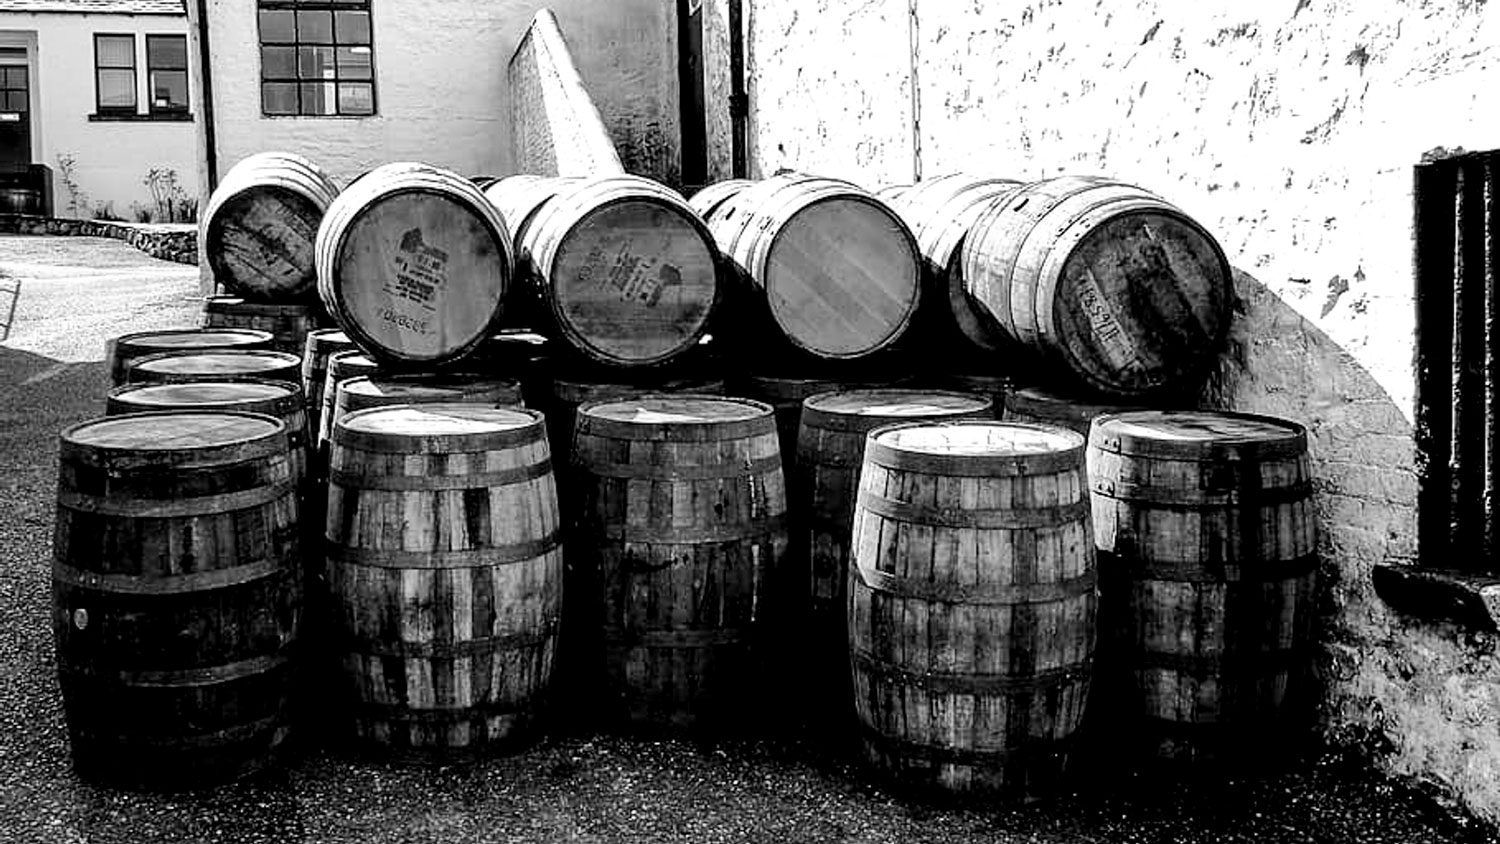 How Much Is a Cask of Whisky? How much is a whisky